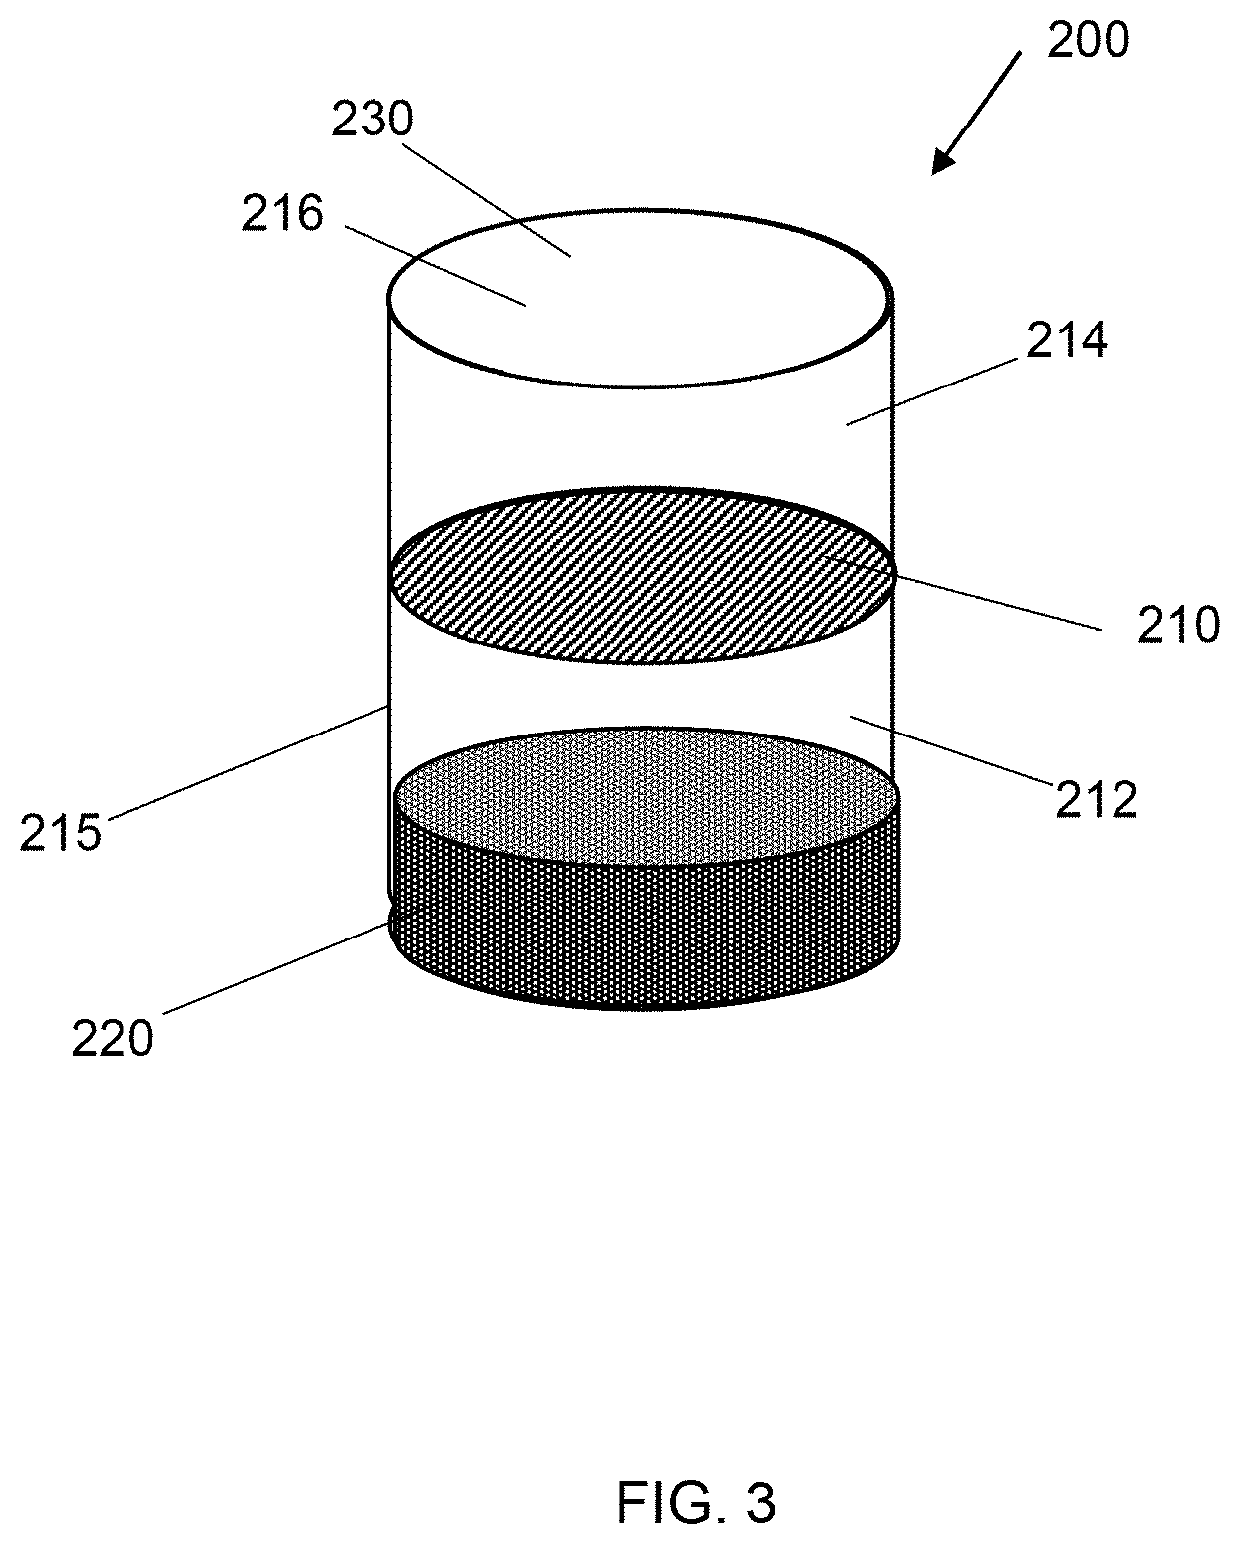 Appliances and containers for preparing a beverage in a transparent chamber